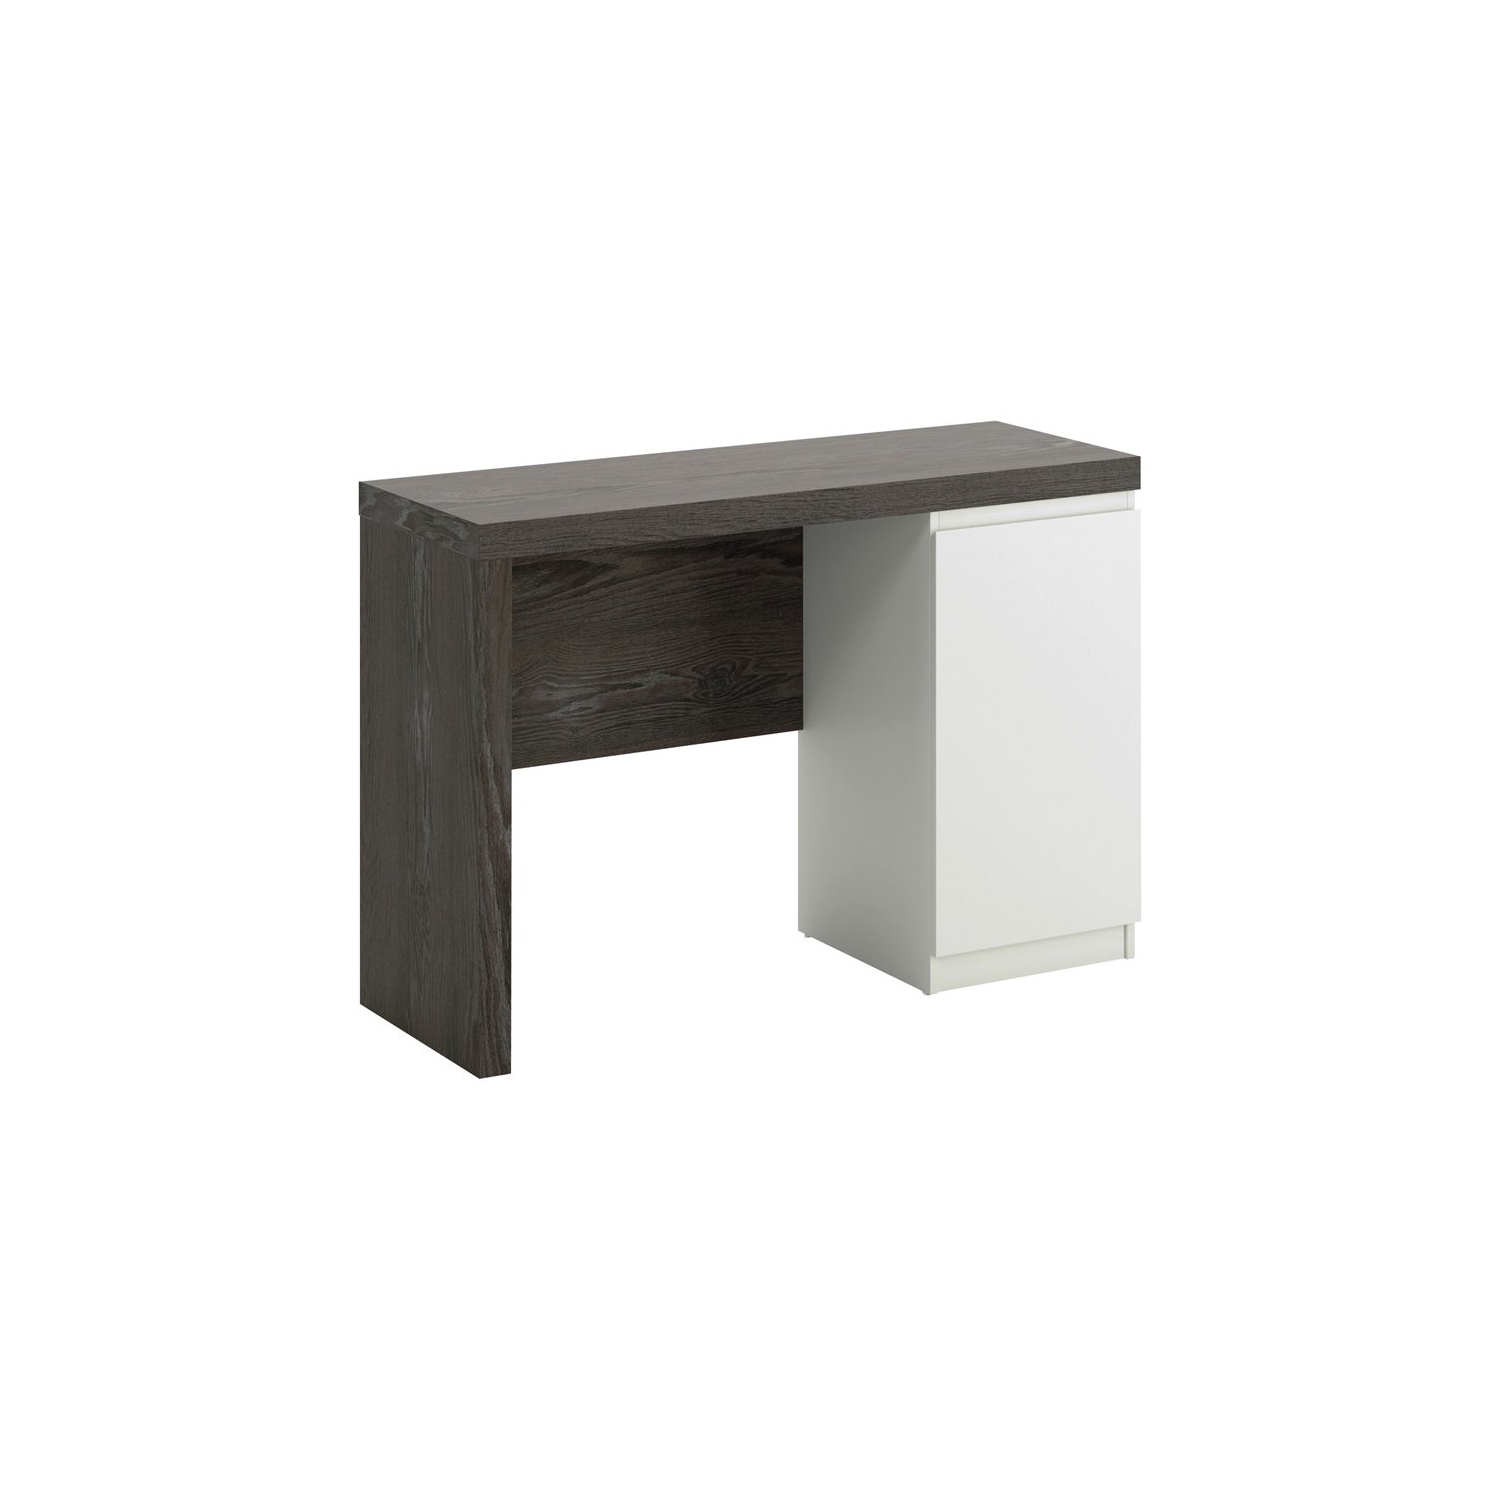 Sauder Hudson Court Engineered Wood Computer Desk in Charcoal Ash with Pearl Oak